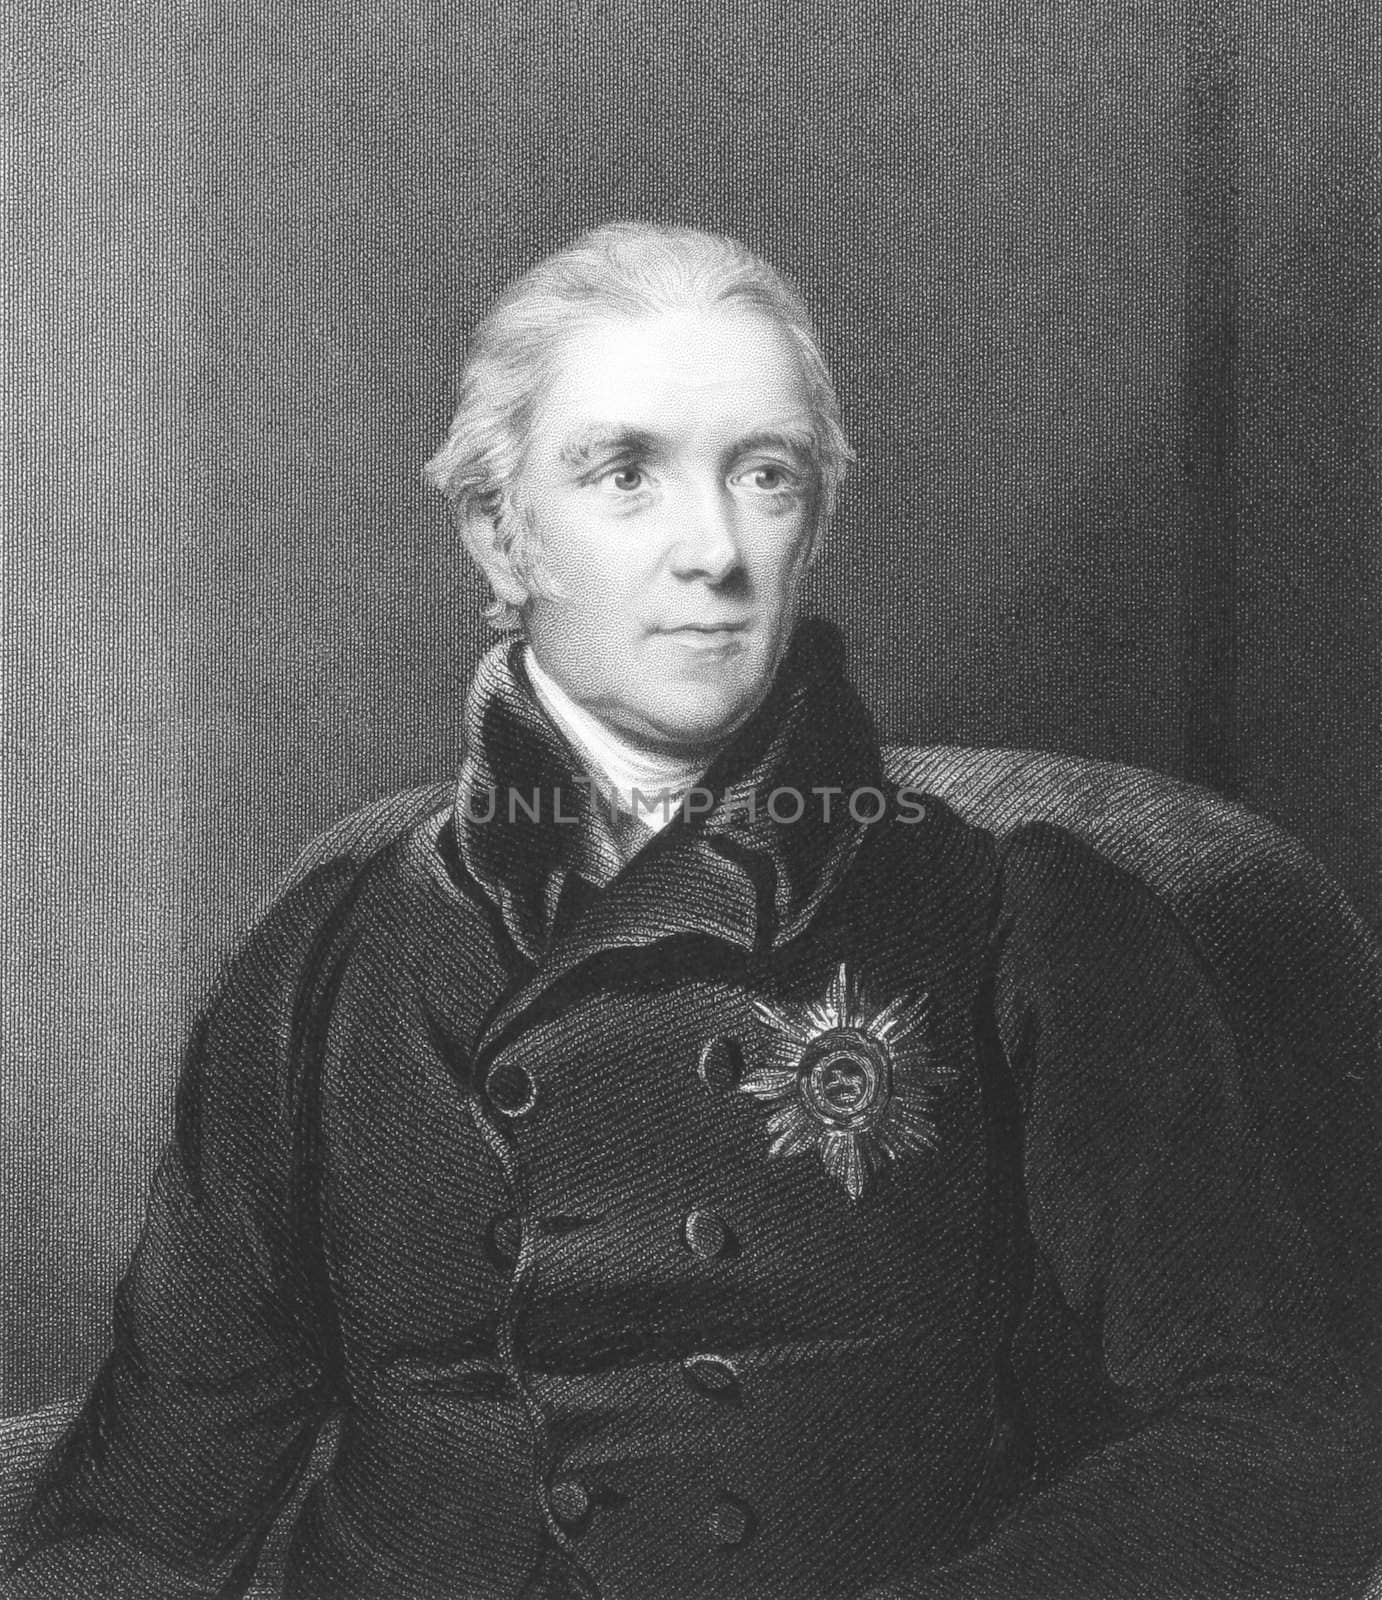 Henry Halford (1766-1844) on engraving from the 1800s. Physician of the royal family. Engraved by J.Cochran and published in London by Fisher, Son & Co.